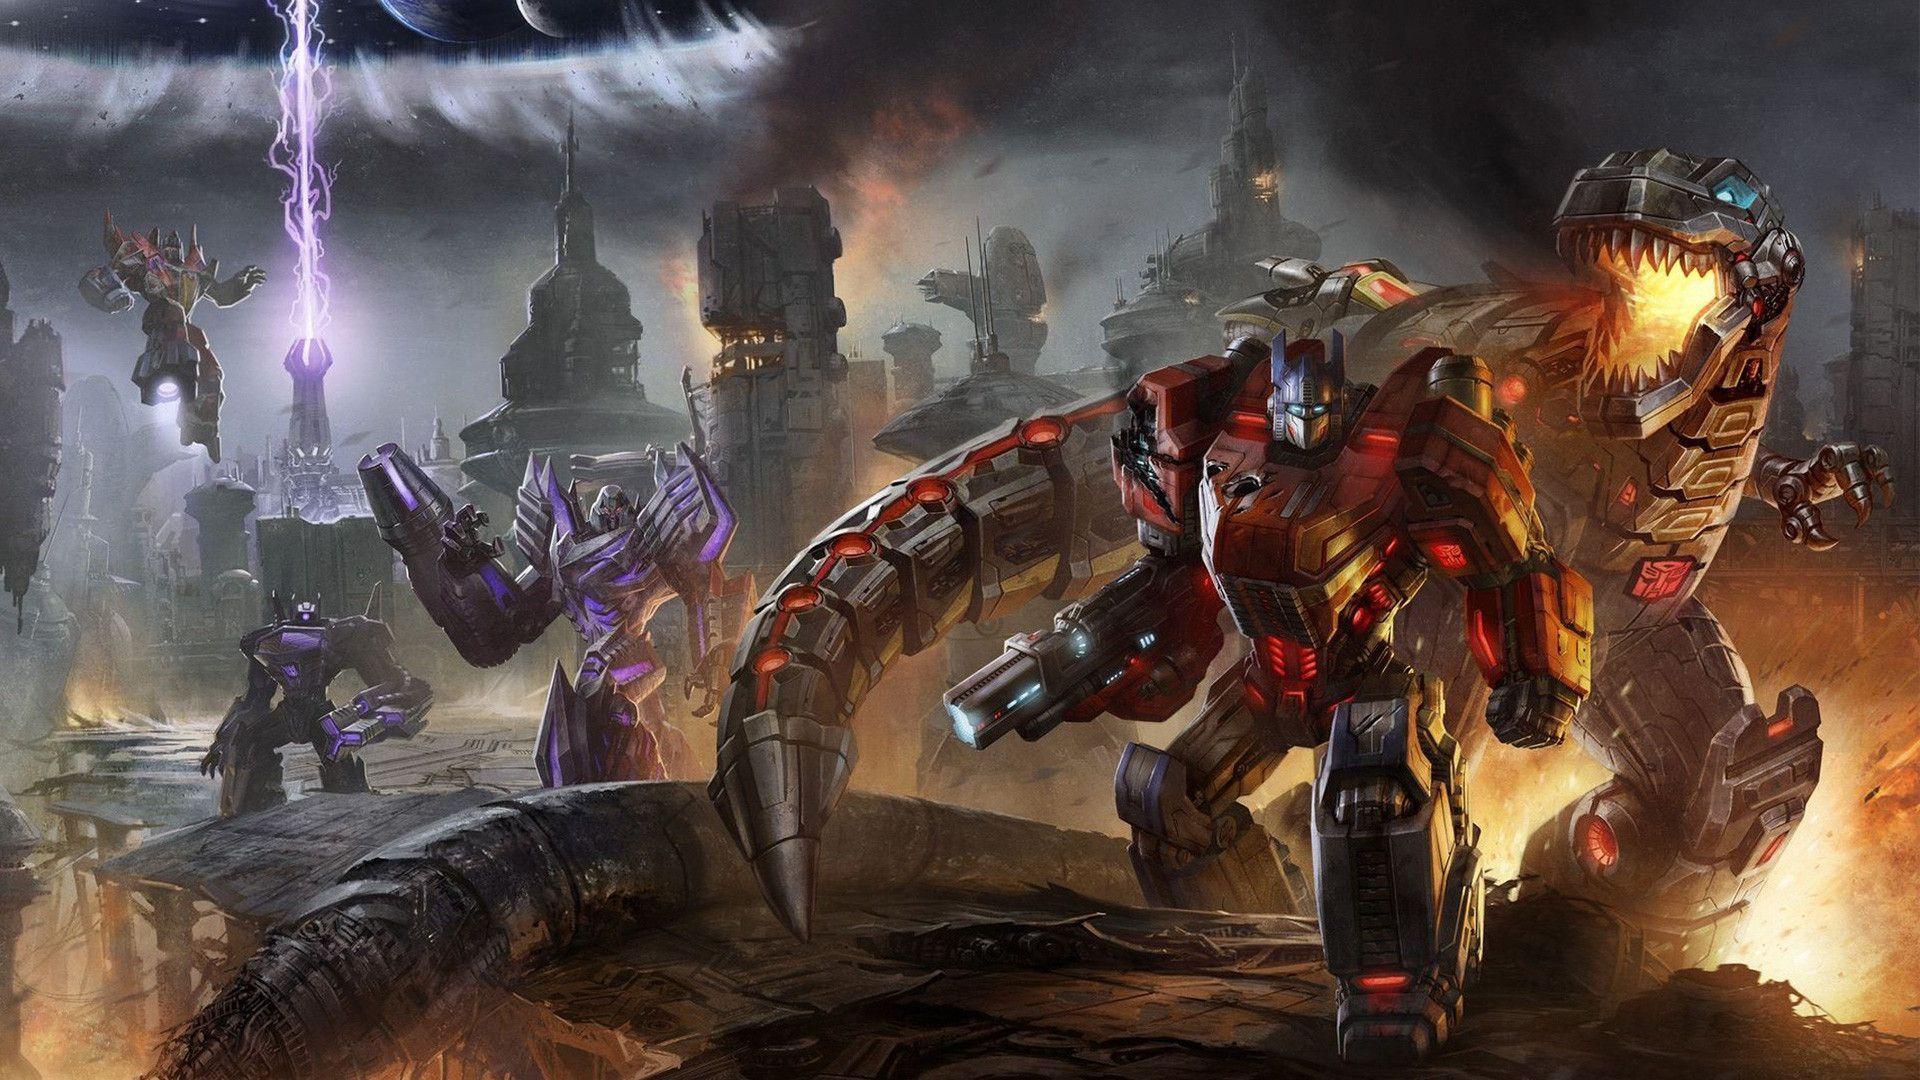 fall of cybertron pc download